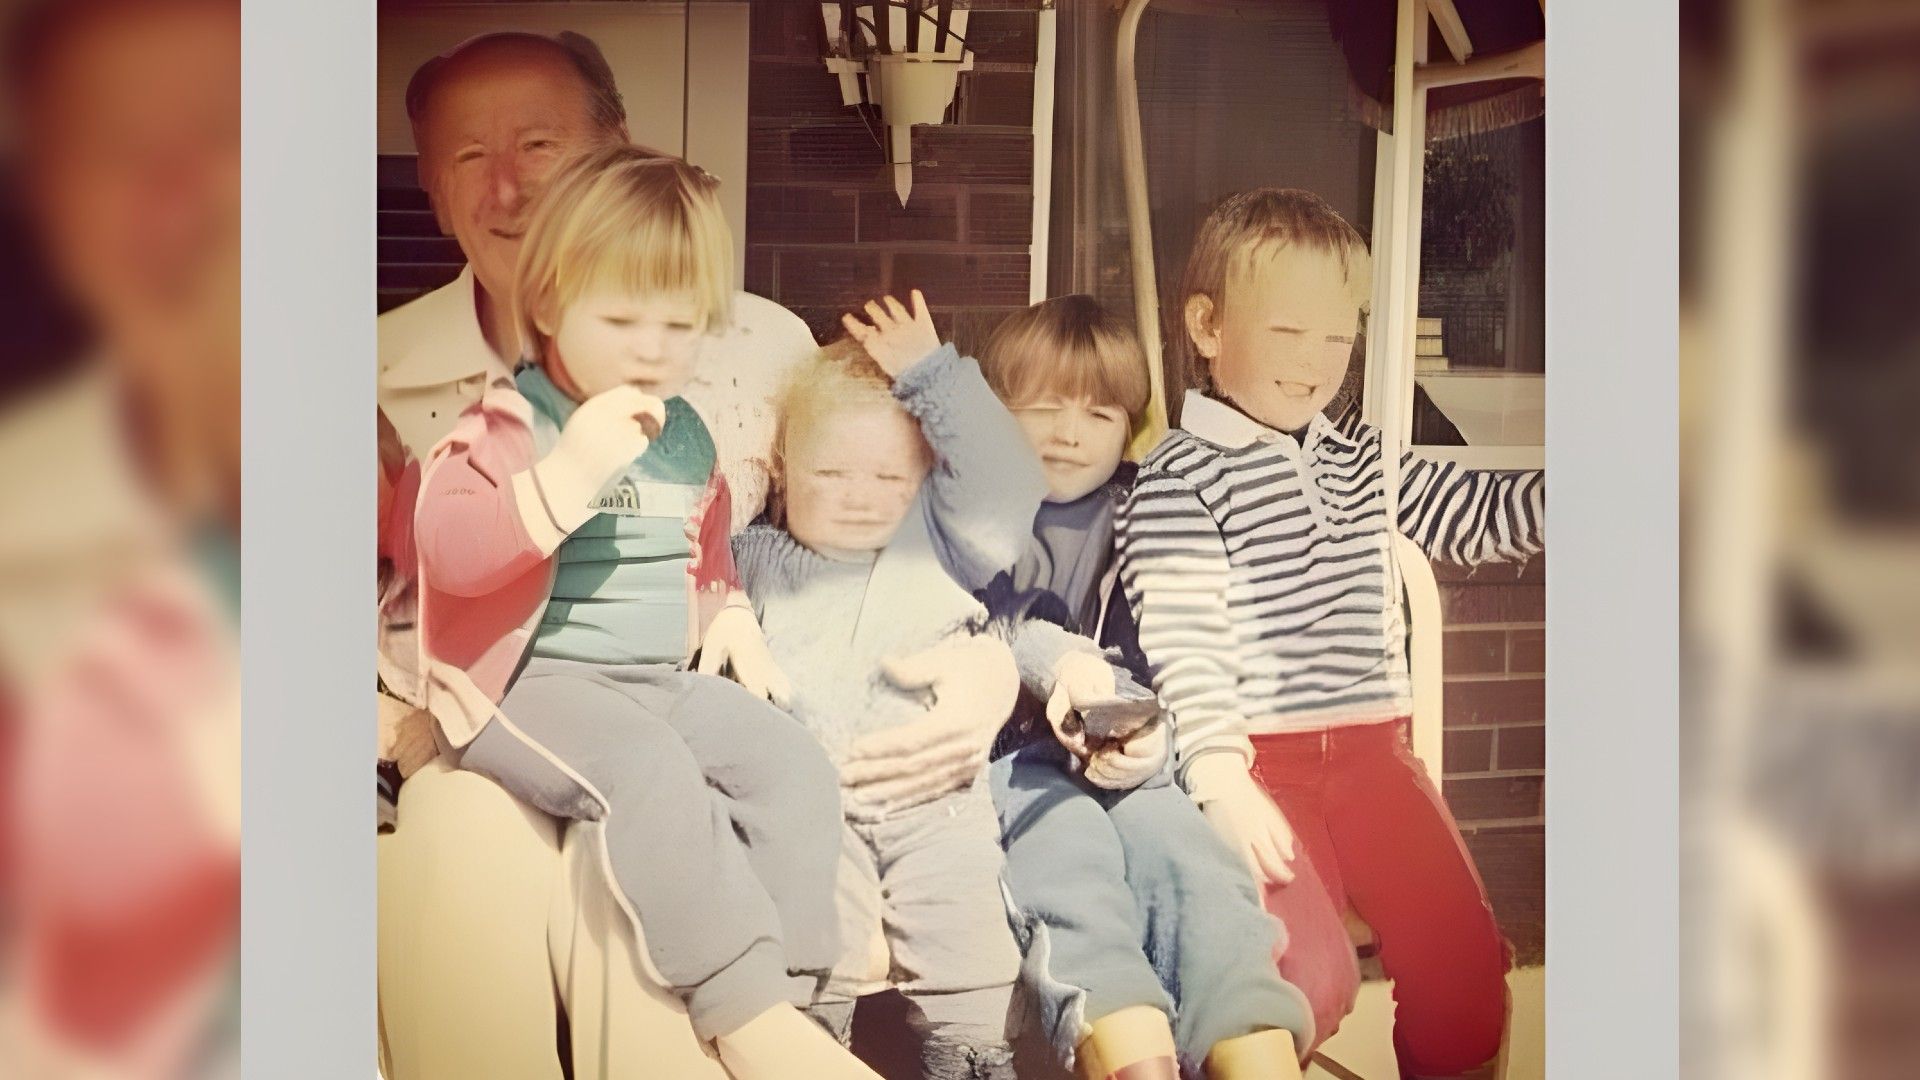 Little Liam Hemsworth with Brothers (Liam is in Red Jacket)